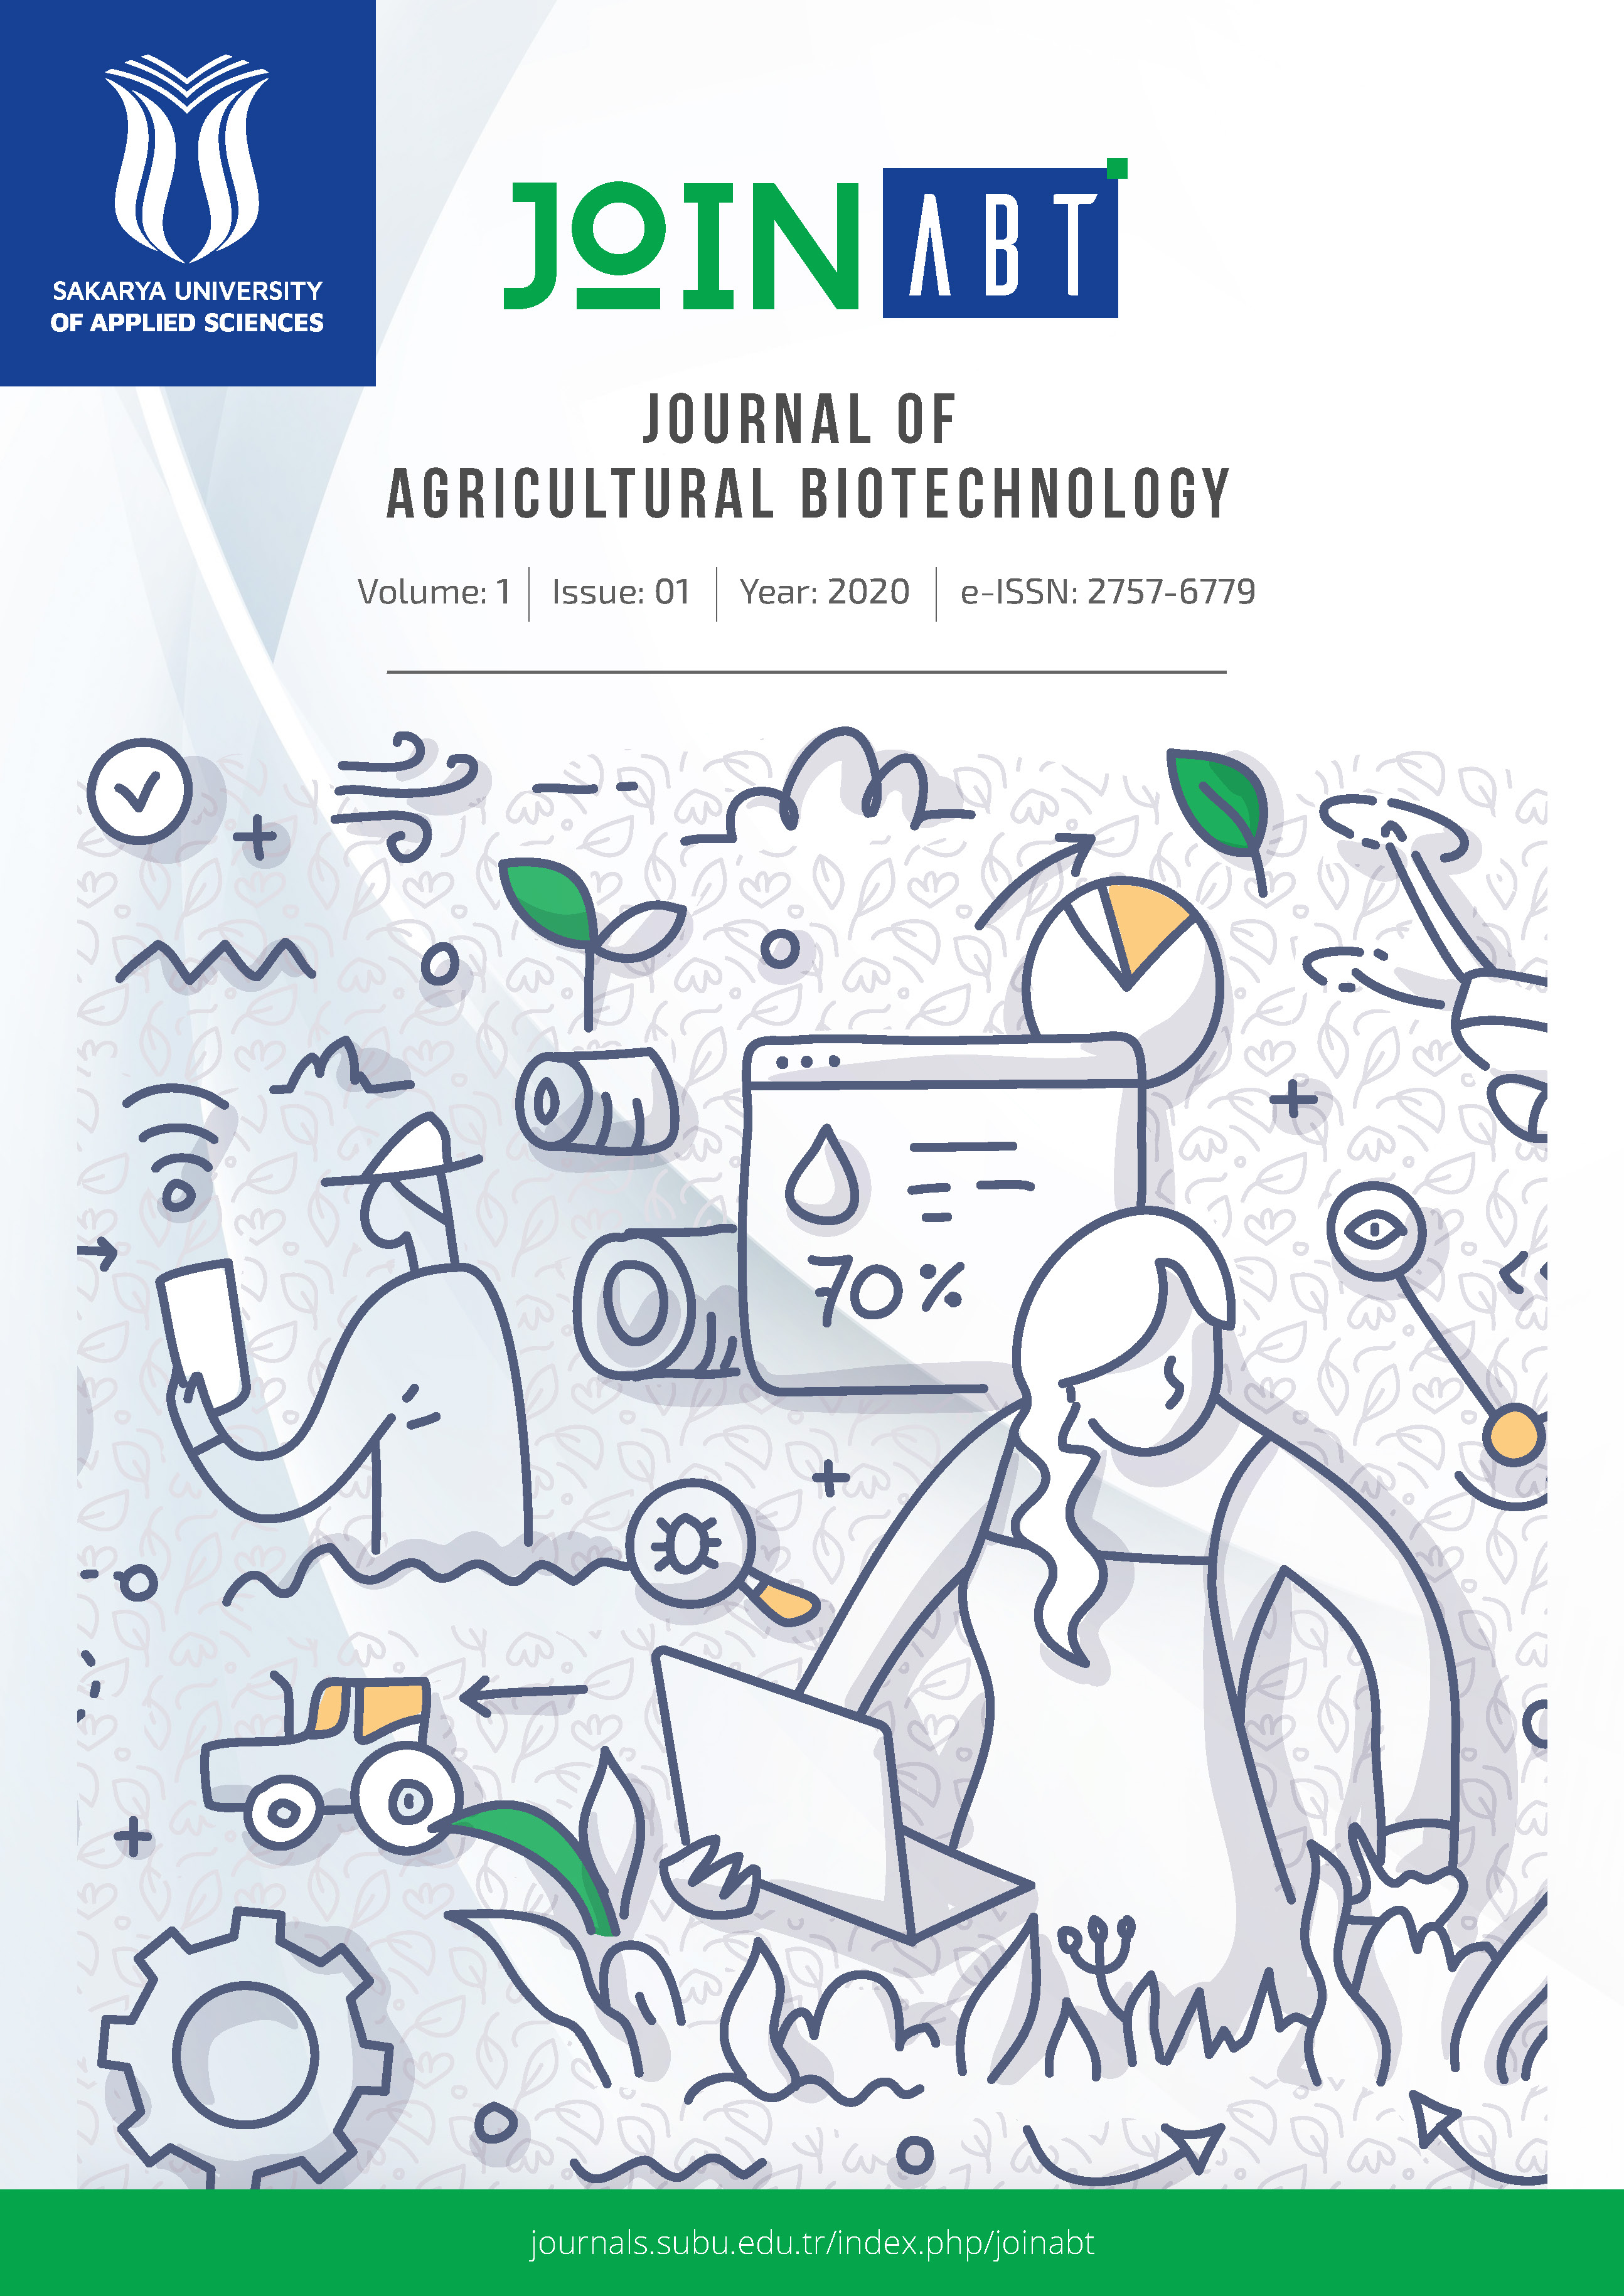 JOURNAL OF AGRICULTURAL BIOTECHNOLOGY